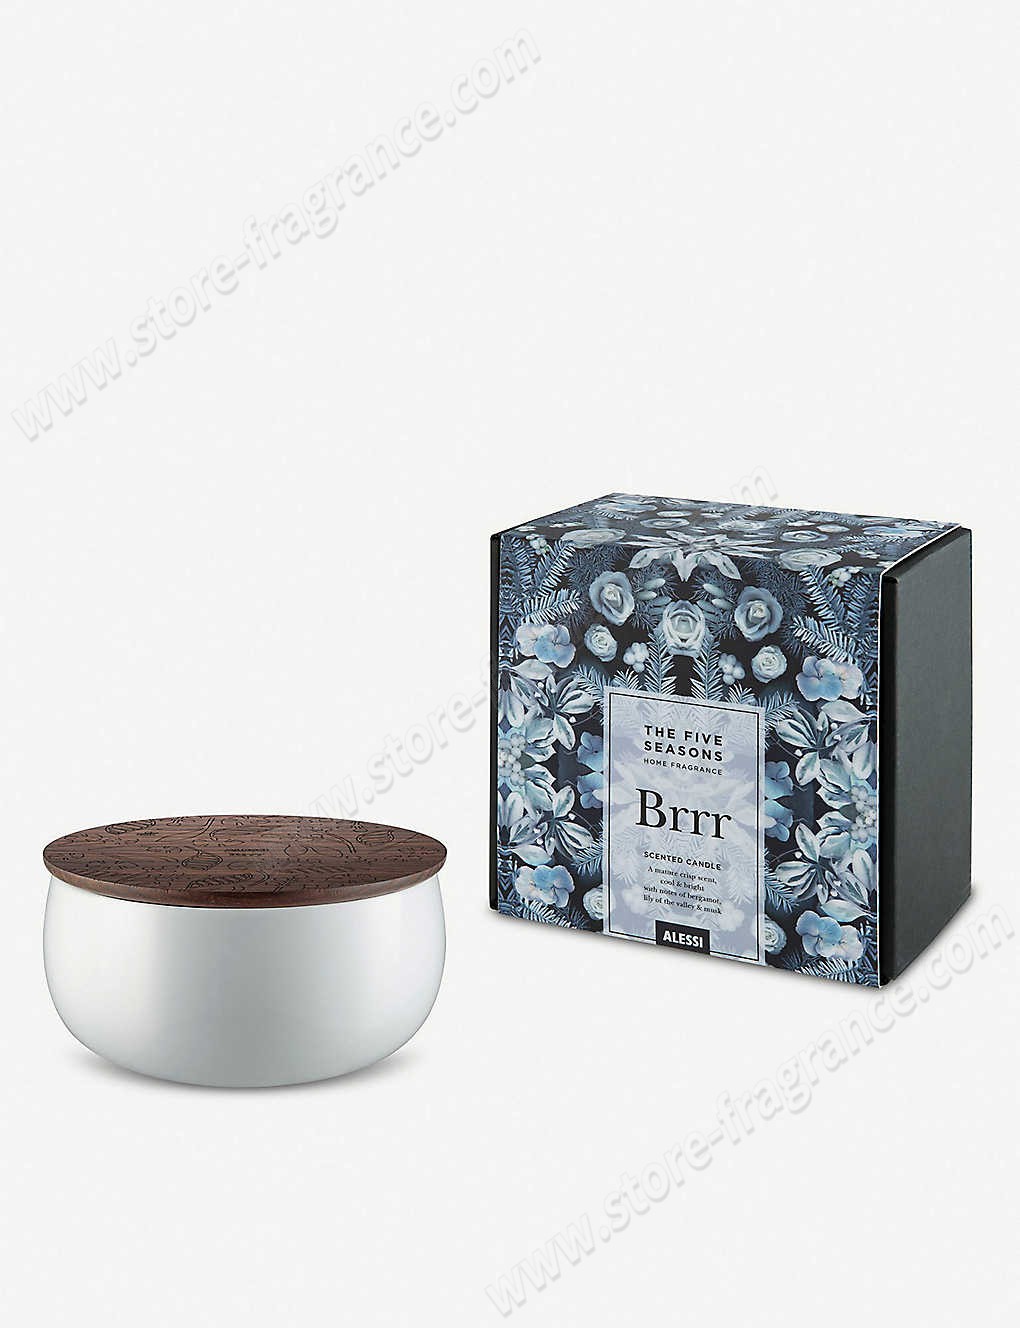 ALESSI/Five Seasons Brrr Scented candle large ✿ Discount Store - ALESSI/Five Seasons Brrr Scented candle large ✿ Discount Store